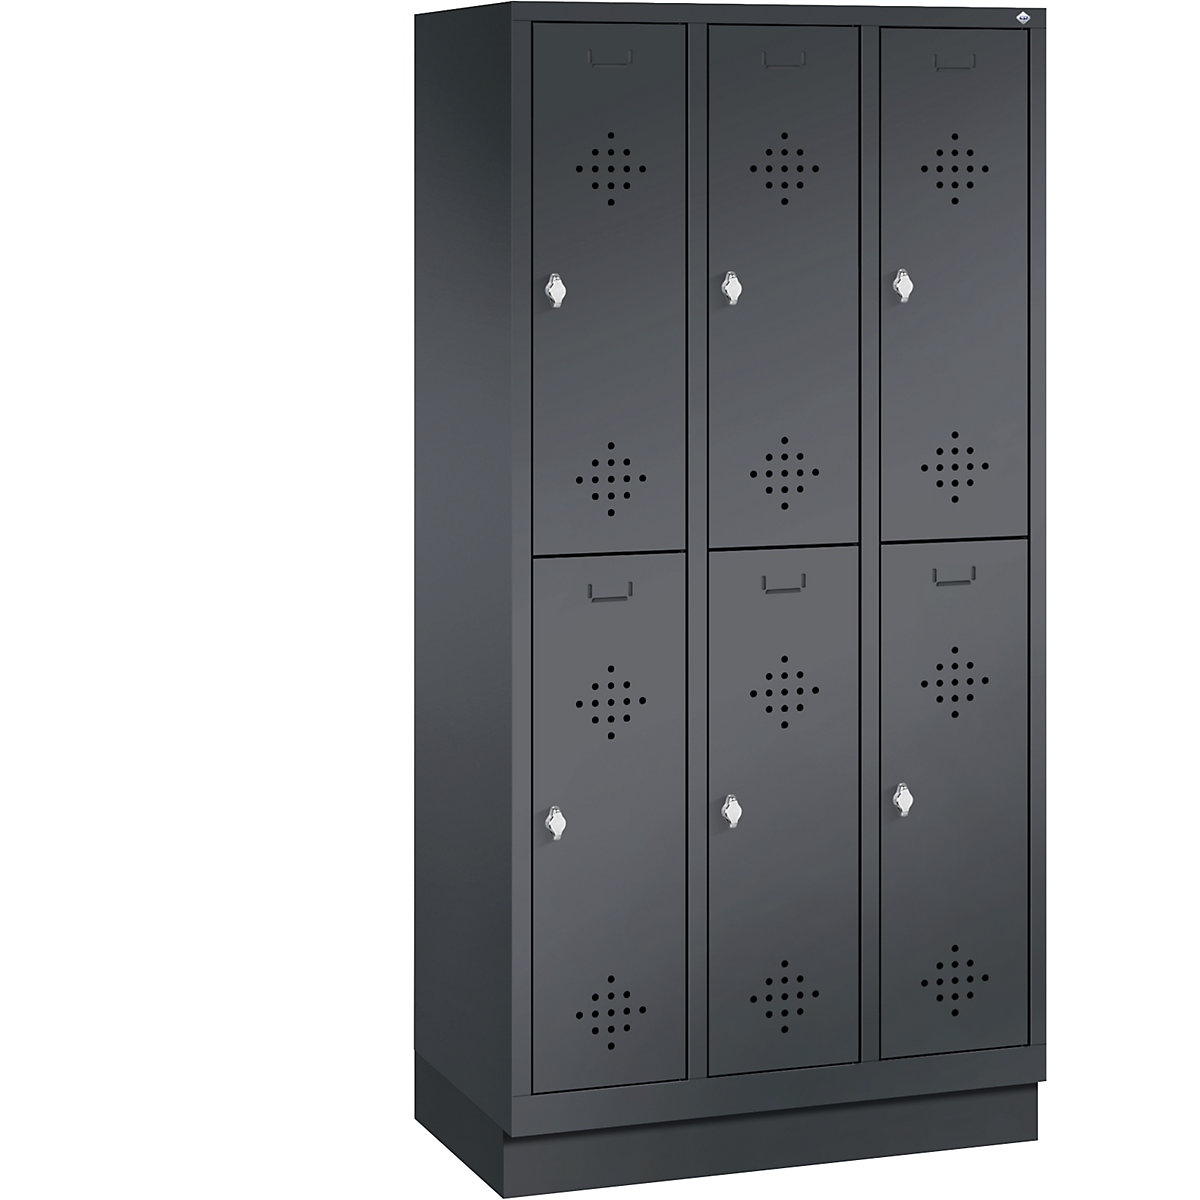 CLASSIC cloakroom locker with plinth, double tier – C+P, 3 compartments, 2 shelf compartments each, compartment width 300 mm, black grey-11